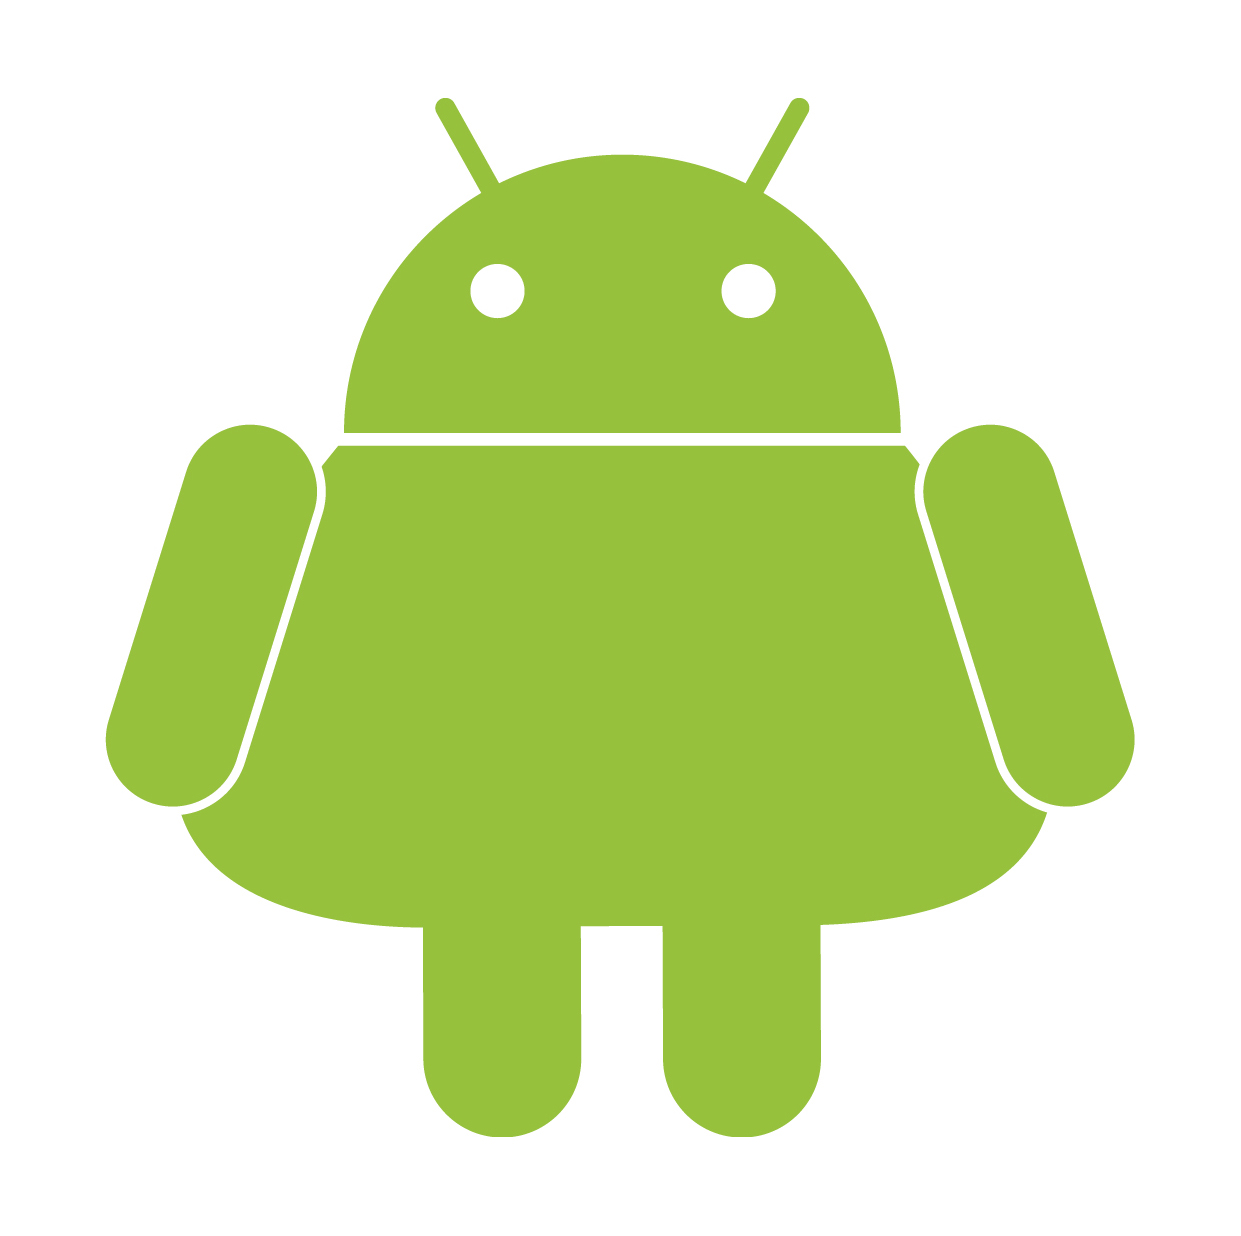 Андроид 15s. Android 15. Android 23. Fat Android.